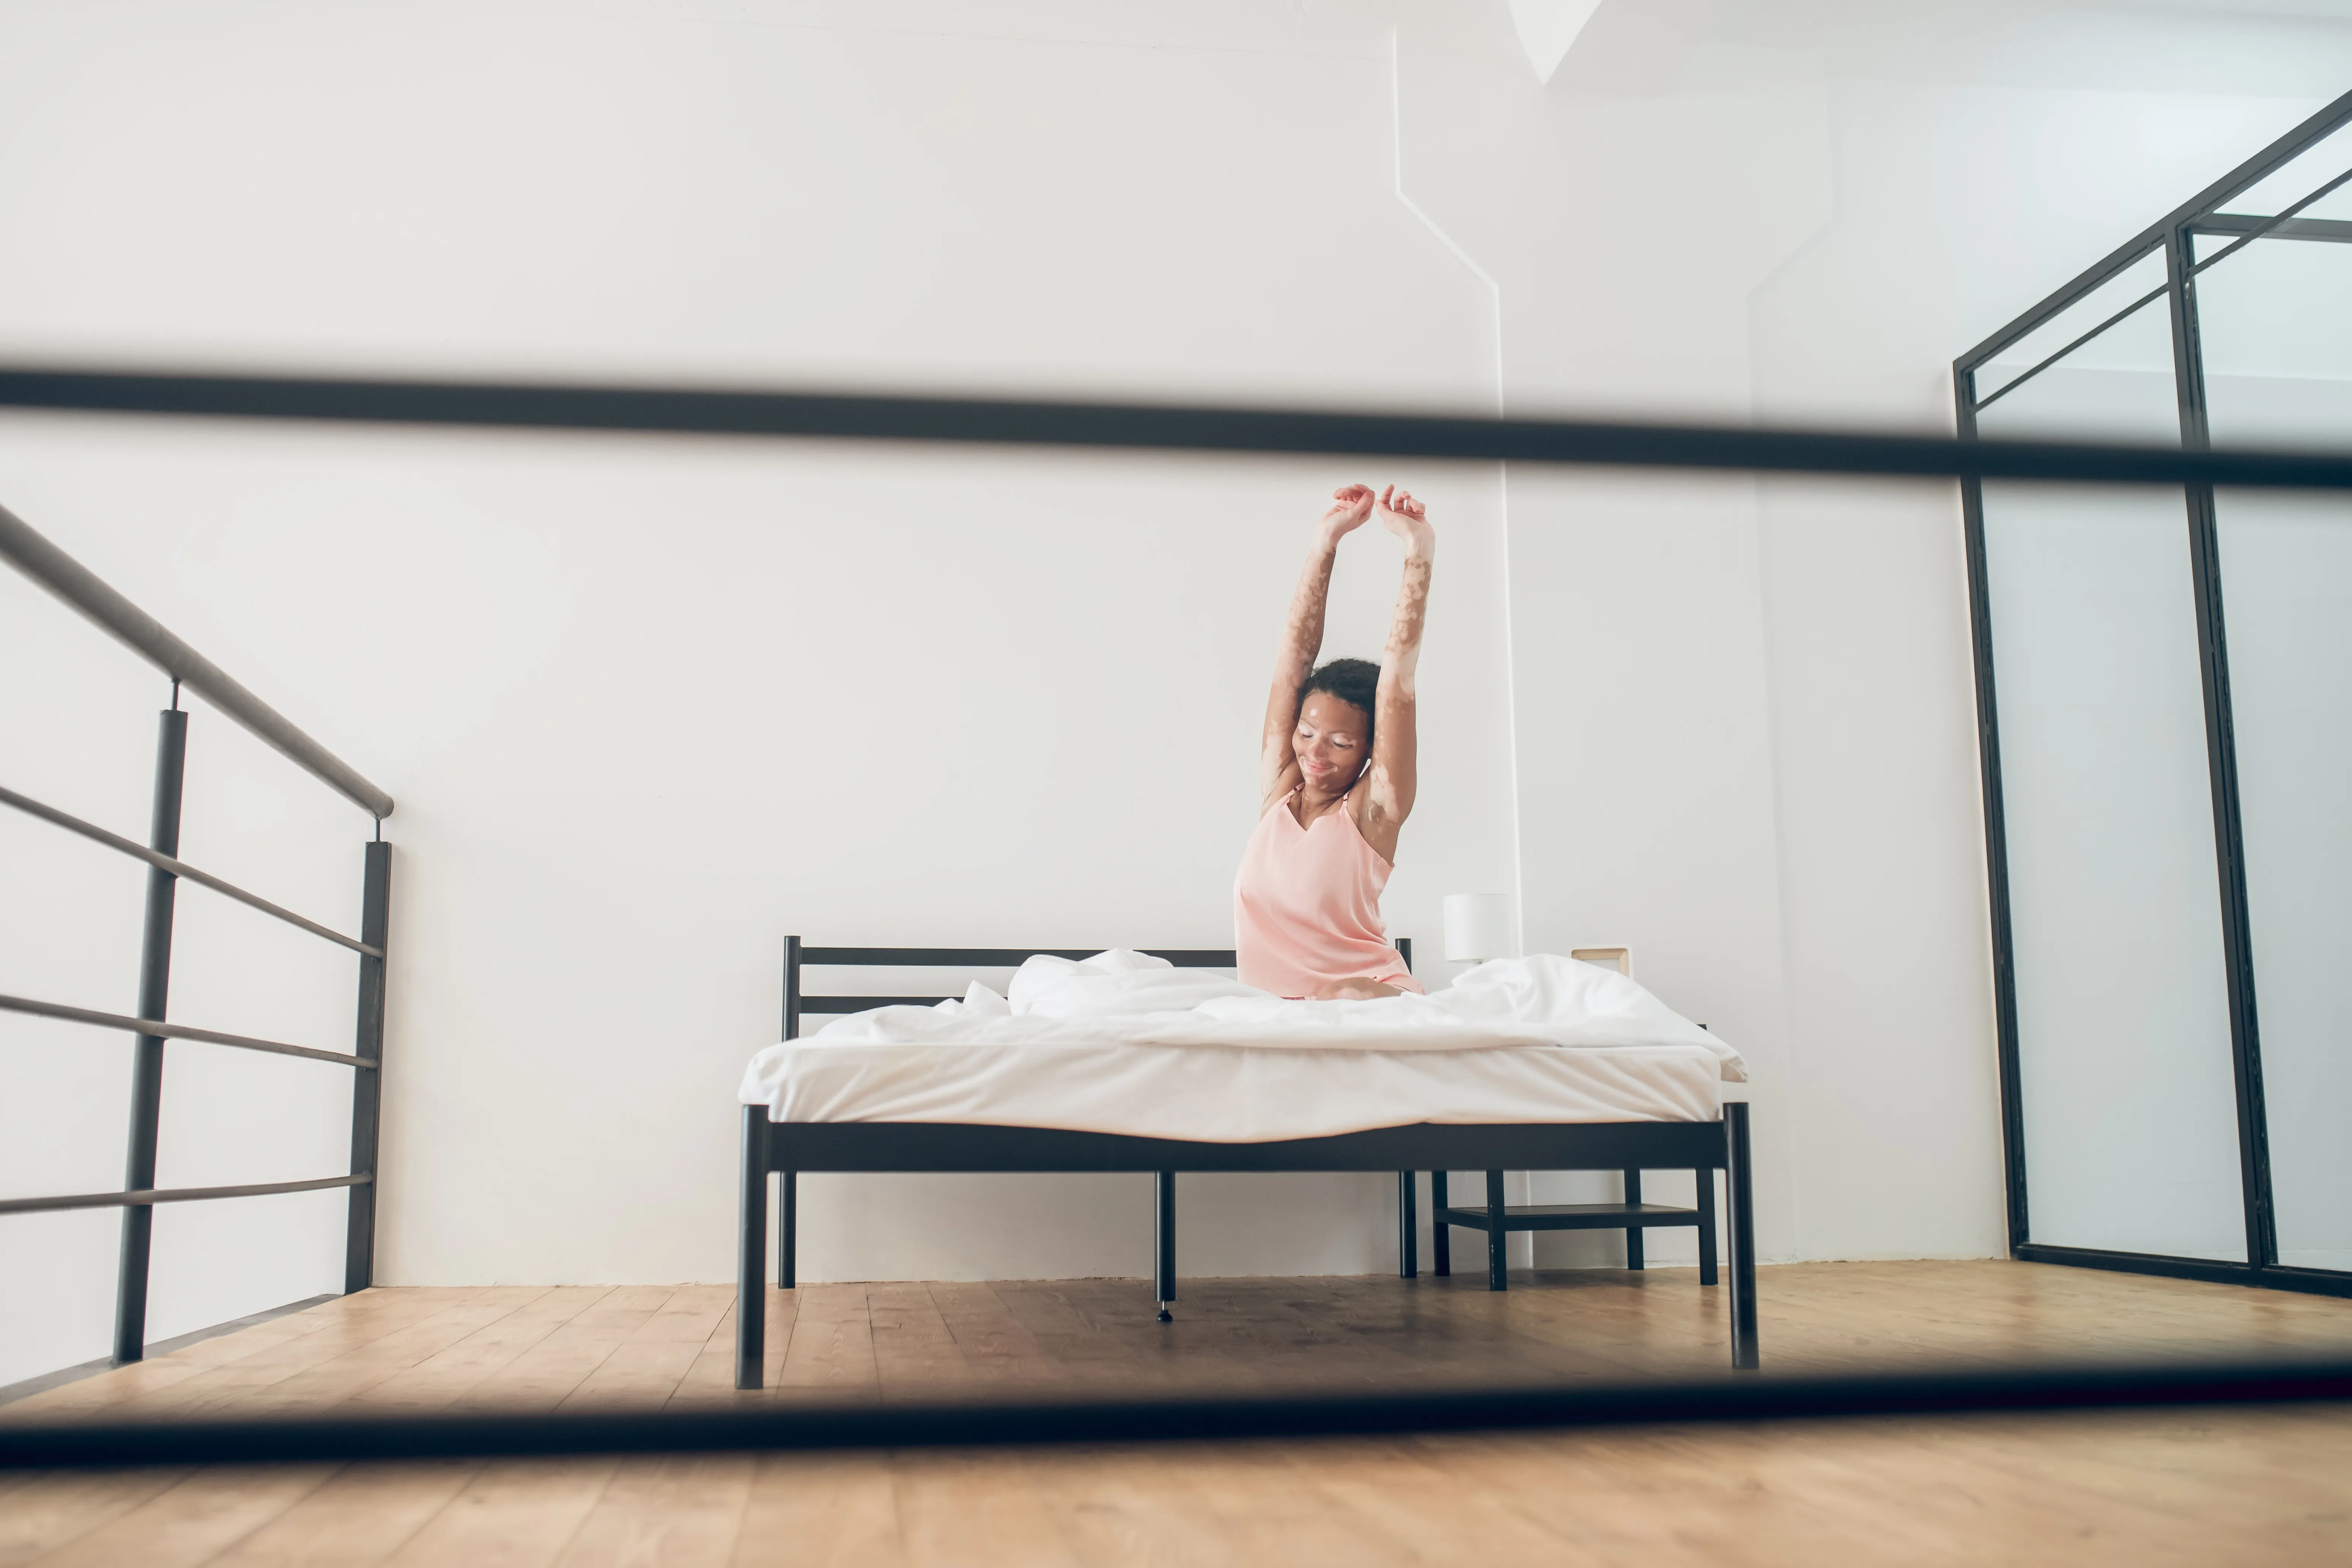 A person stretching on a bed with a metal box spring, in a bright room.